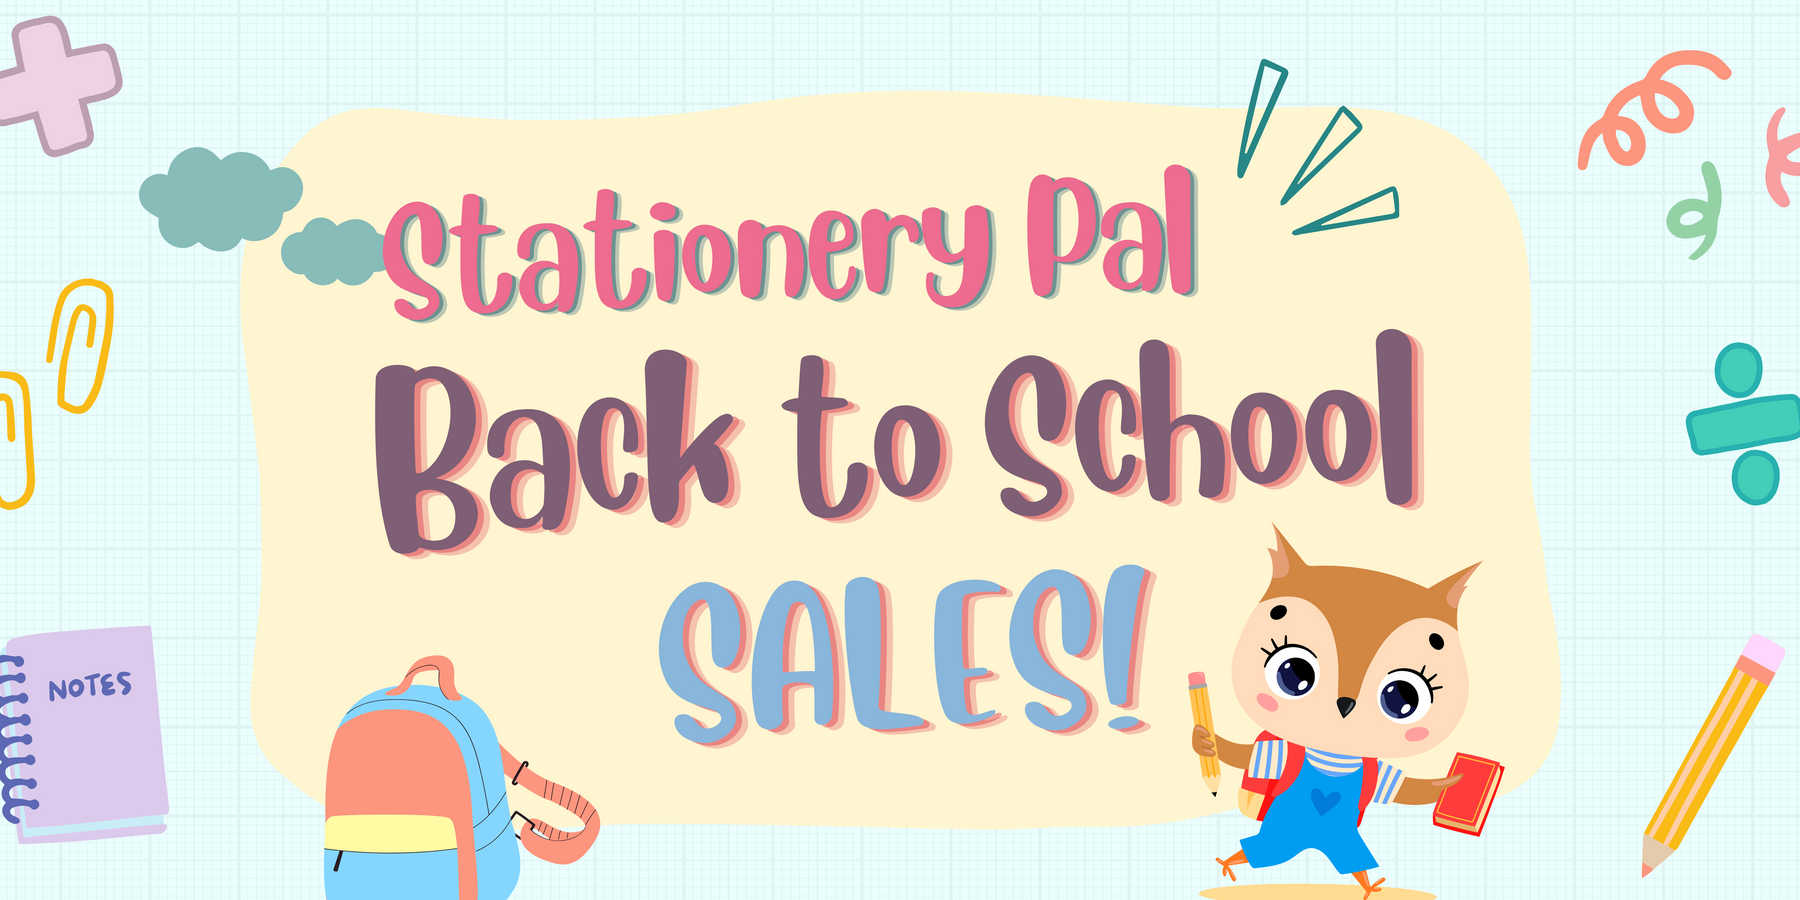 SAVE BIG ON BACK-TO-SCHOOL SALES AT STATIONERY PAL!